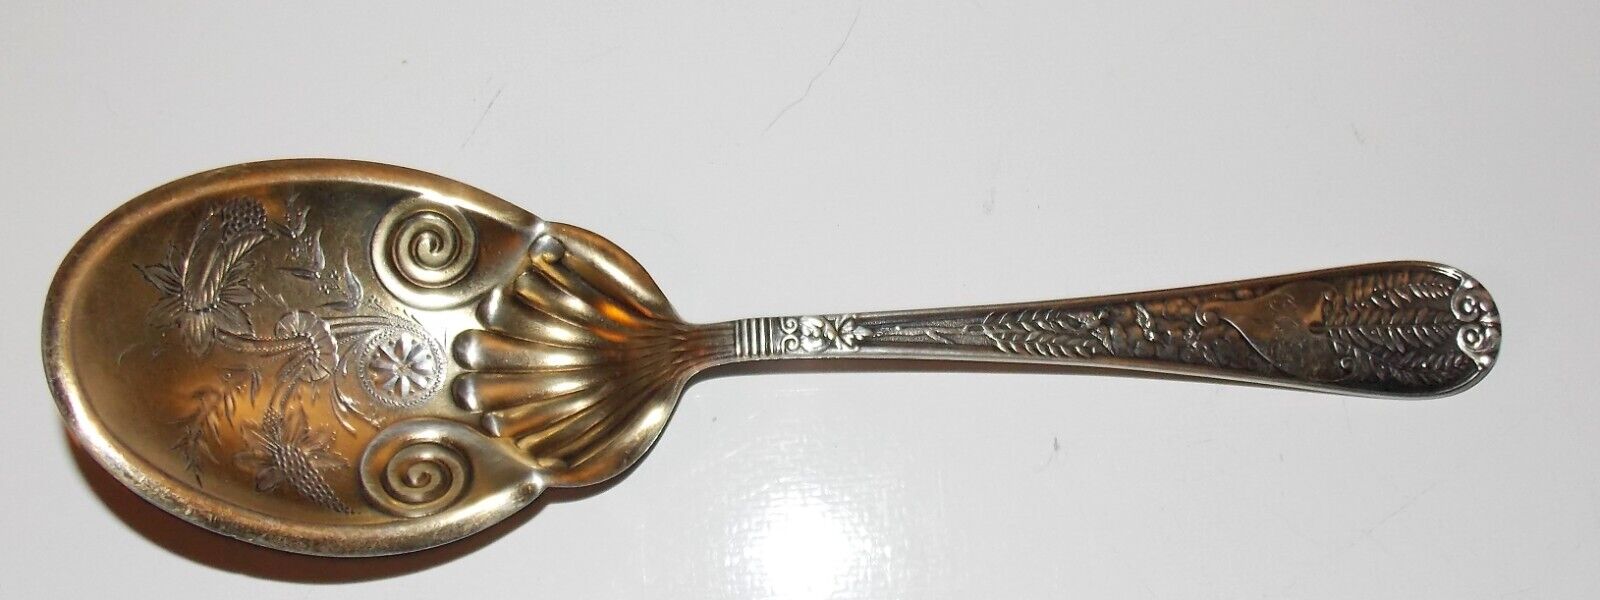 AWESOME 1885 GORHAM STERLING BIG 8 3/4" AESTHETIC SCALLOPED SPOON 60 GRAMS